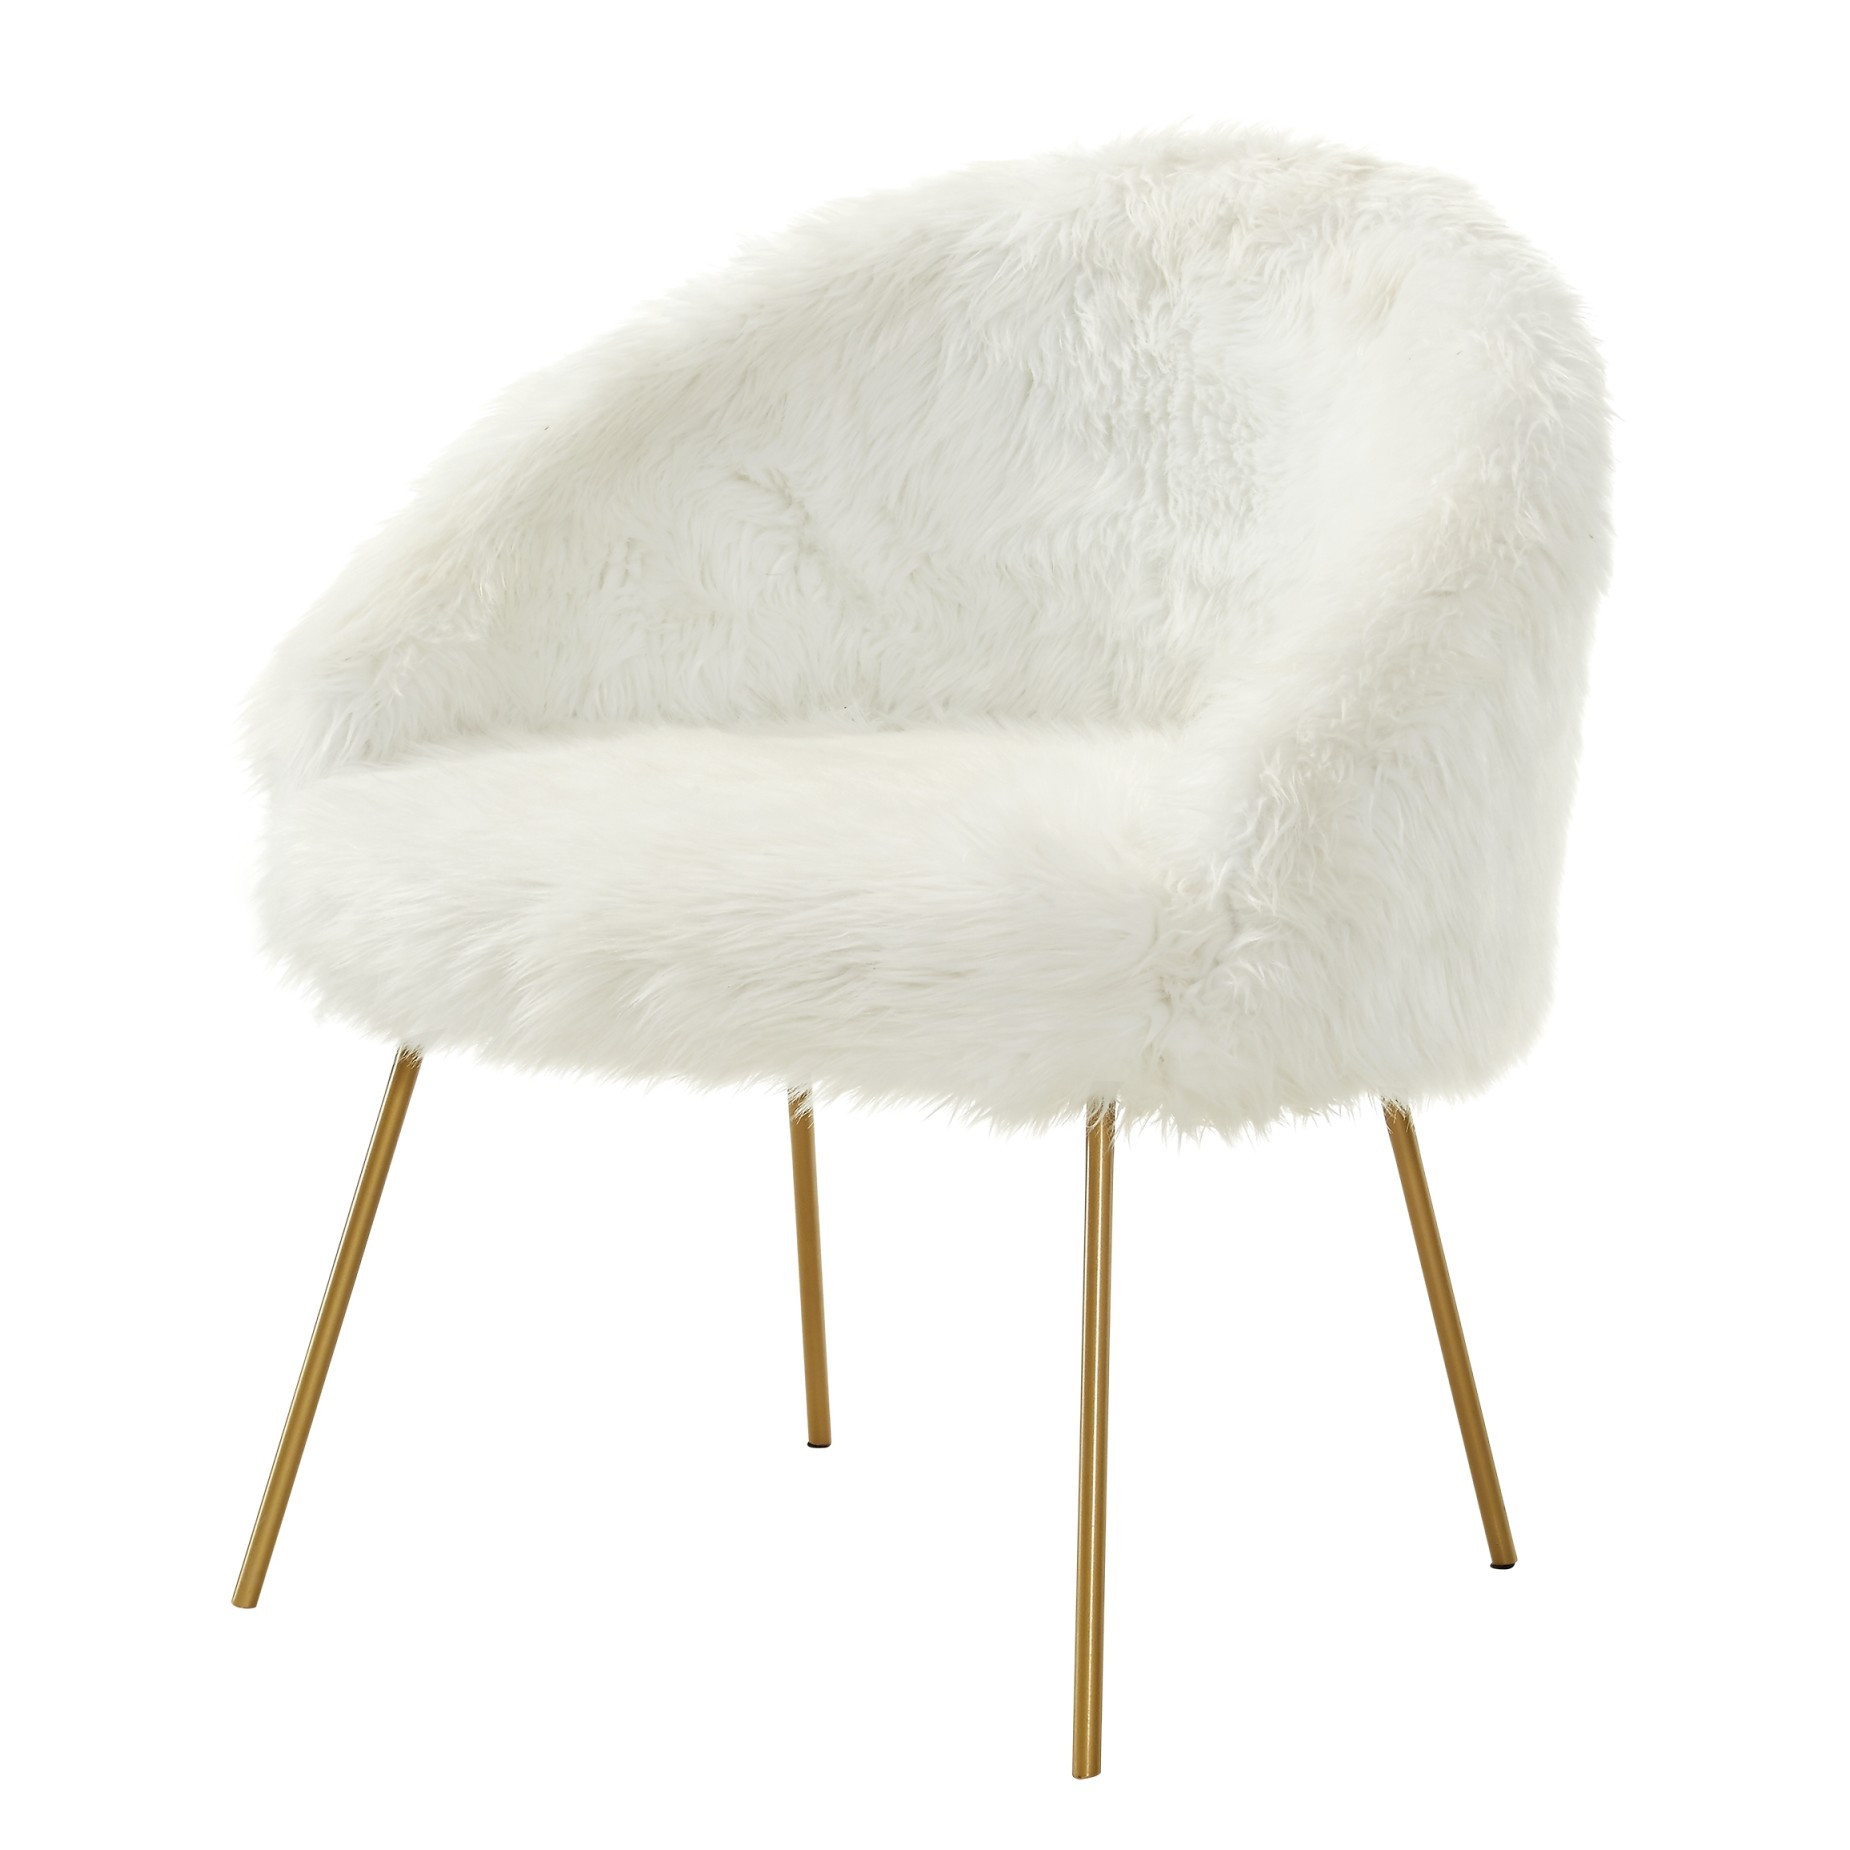 28" White And Gold Faux Fur Arm Chair-533847-1